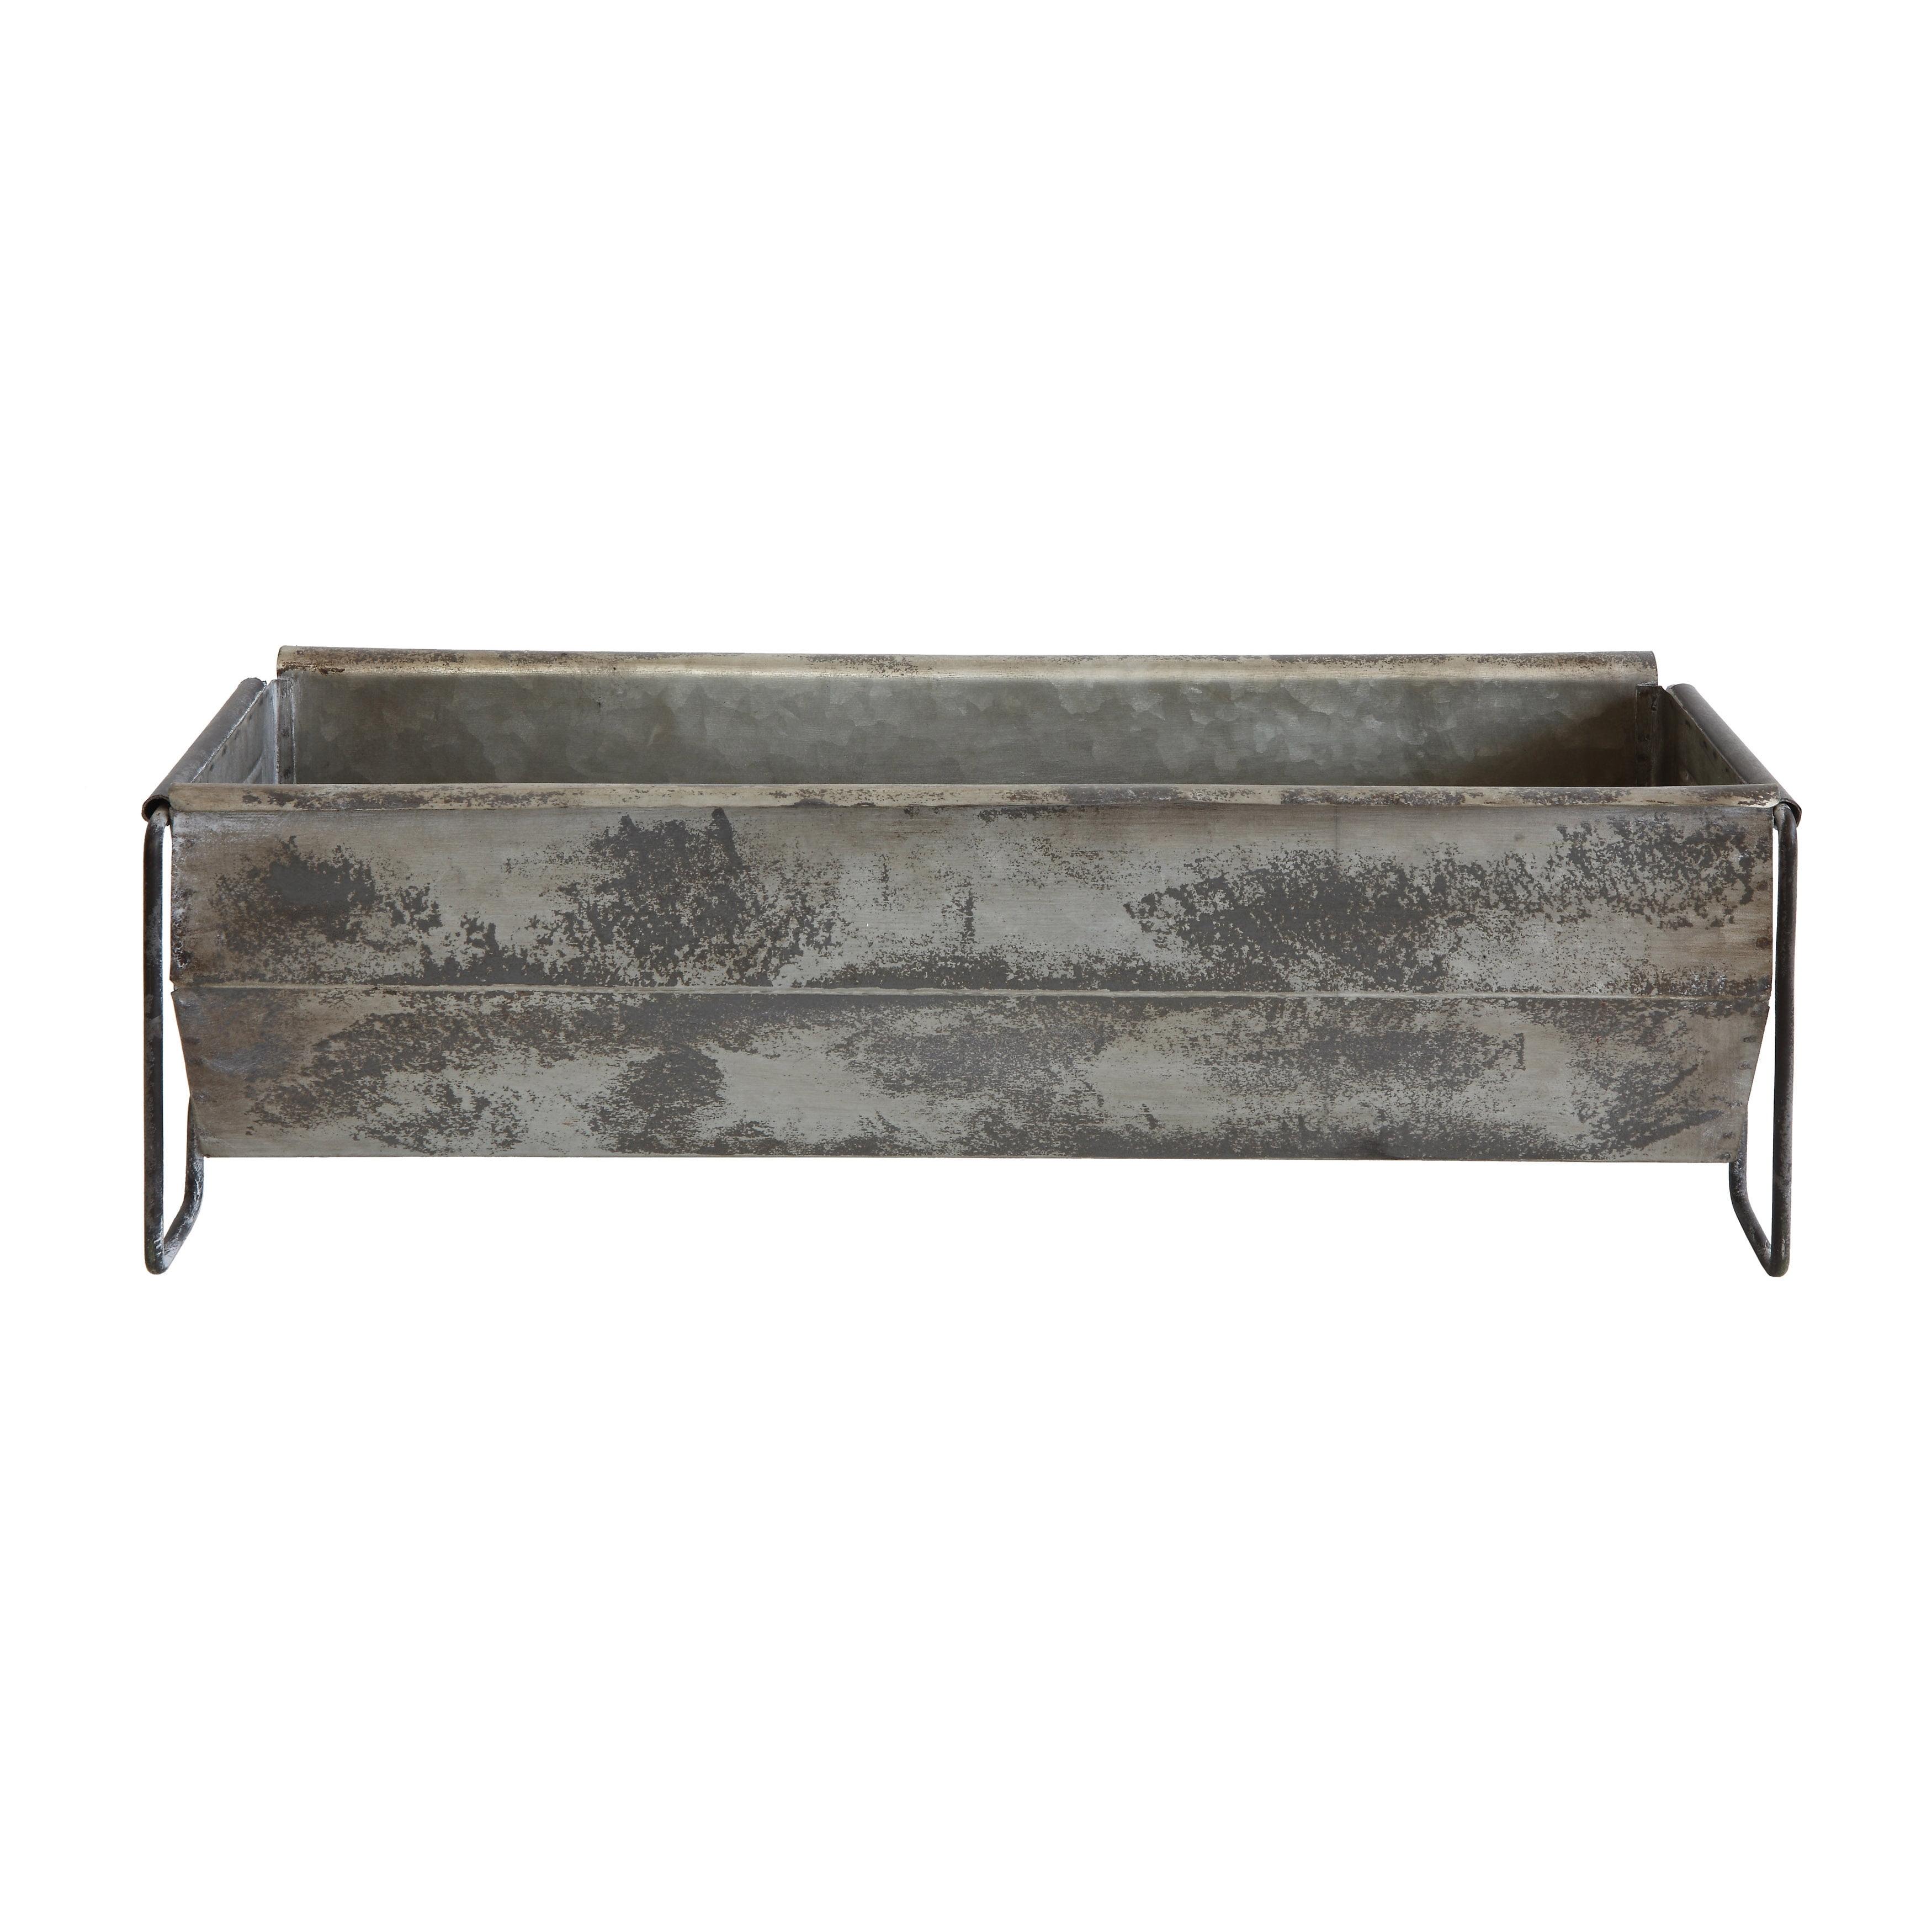 Rustic Farmhouse Metal Trough with Contemporary Legs and Distressed Zinc Finish